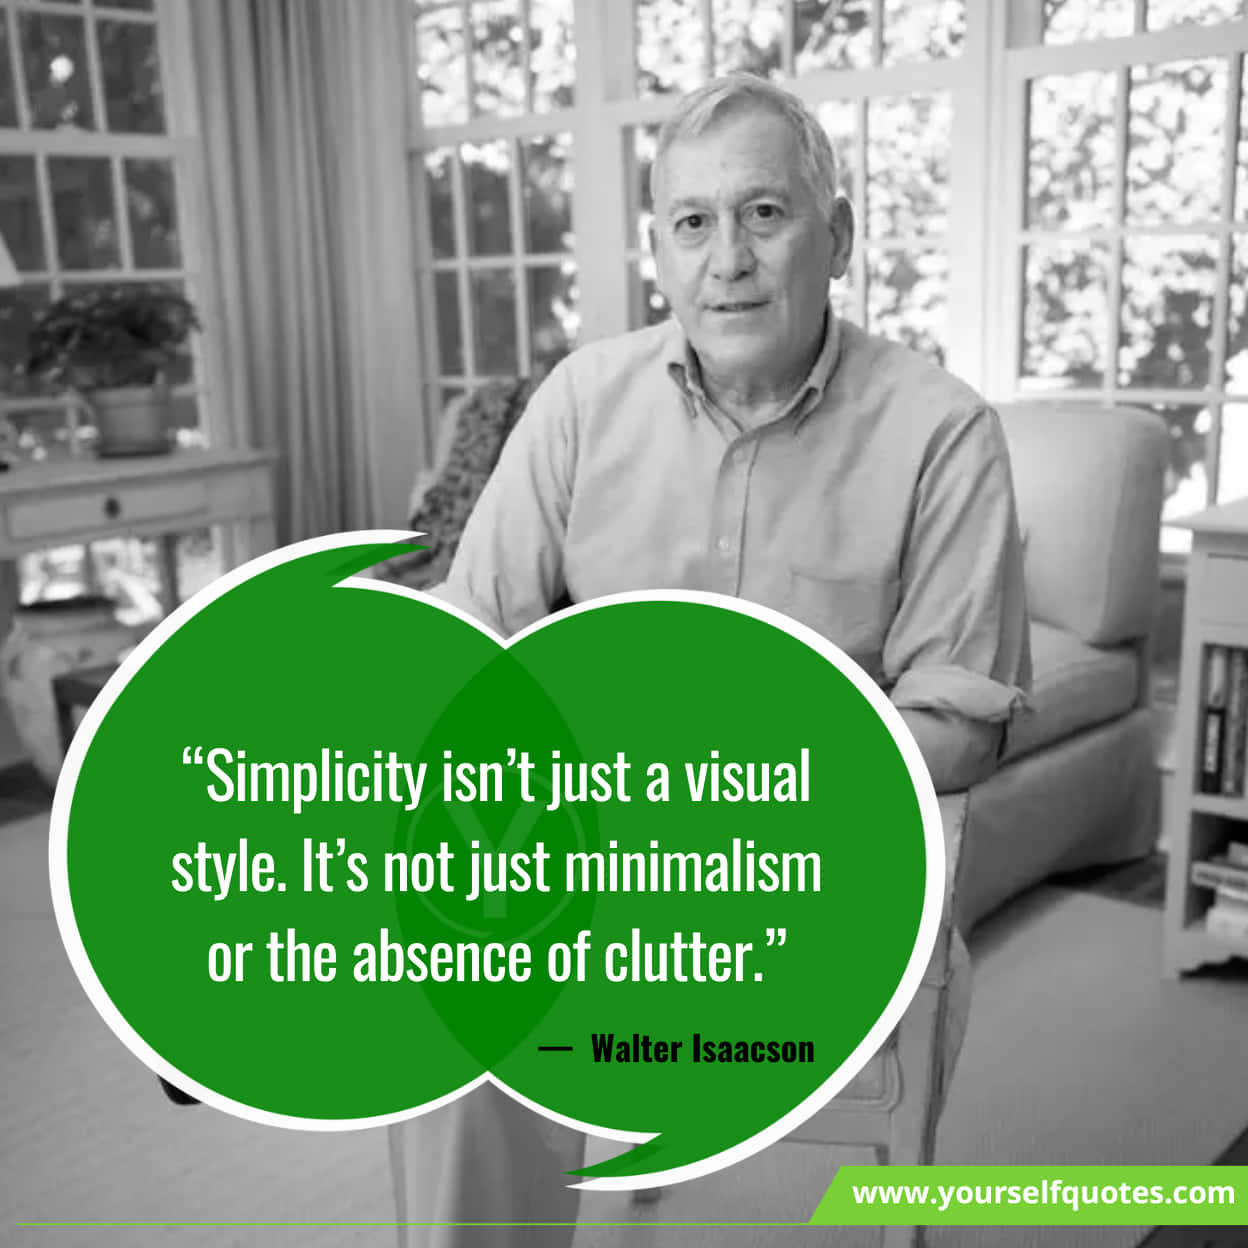 Walter Isaacson Quotes On Simplicity